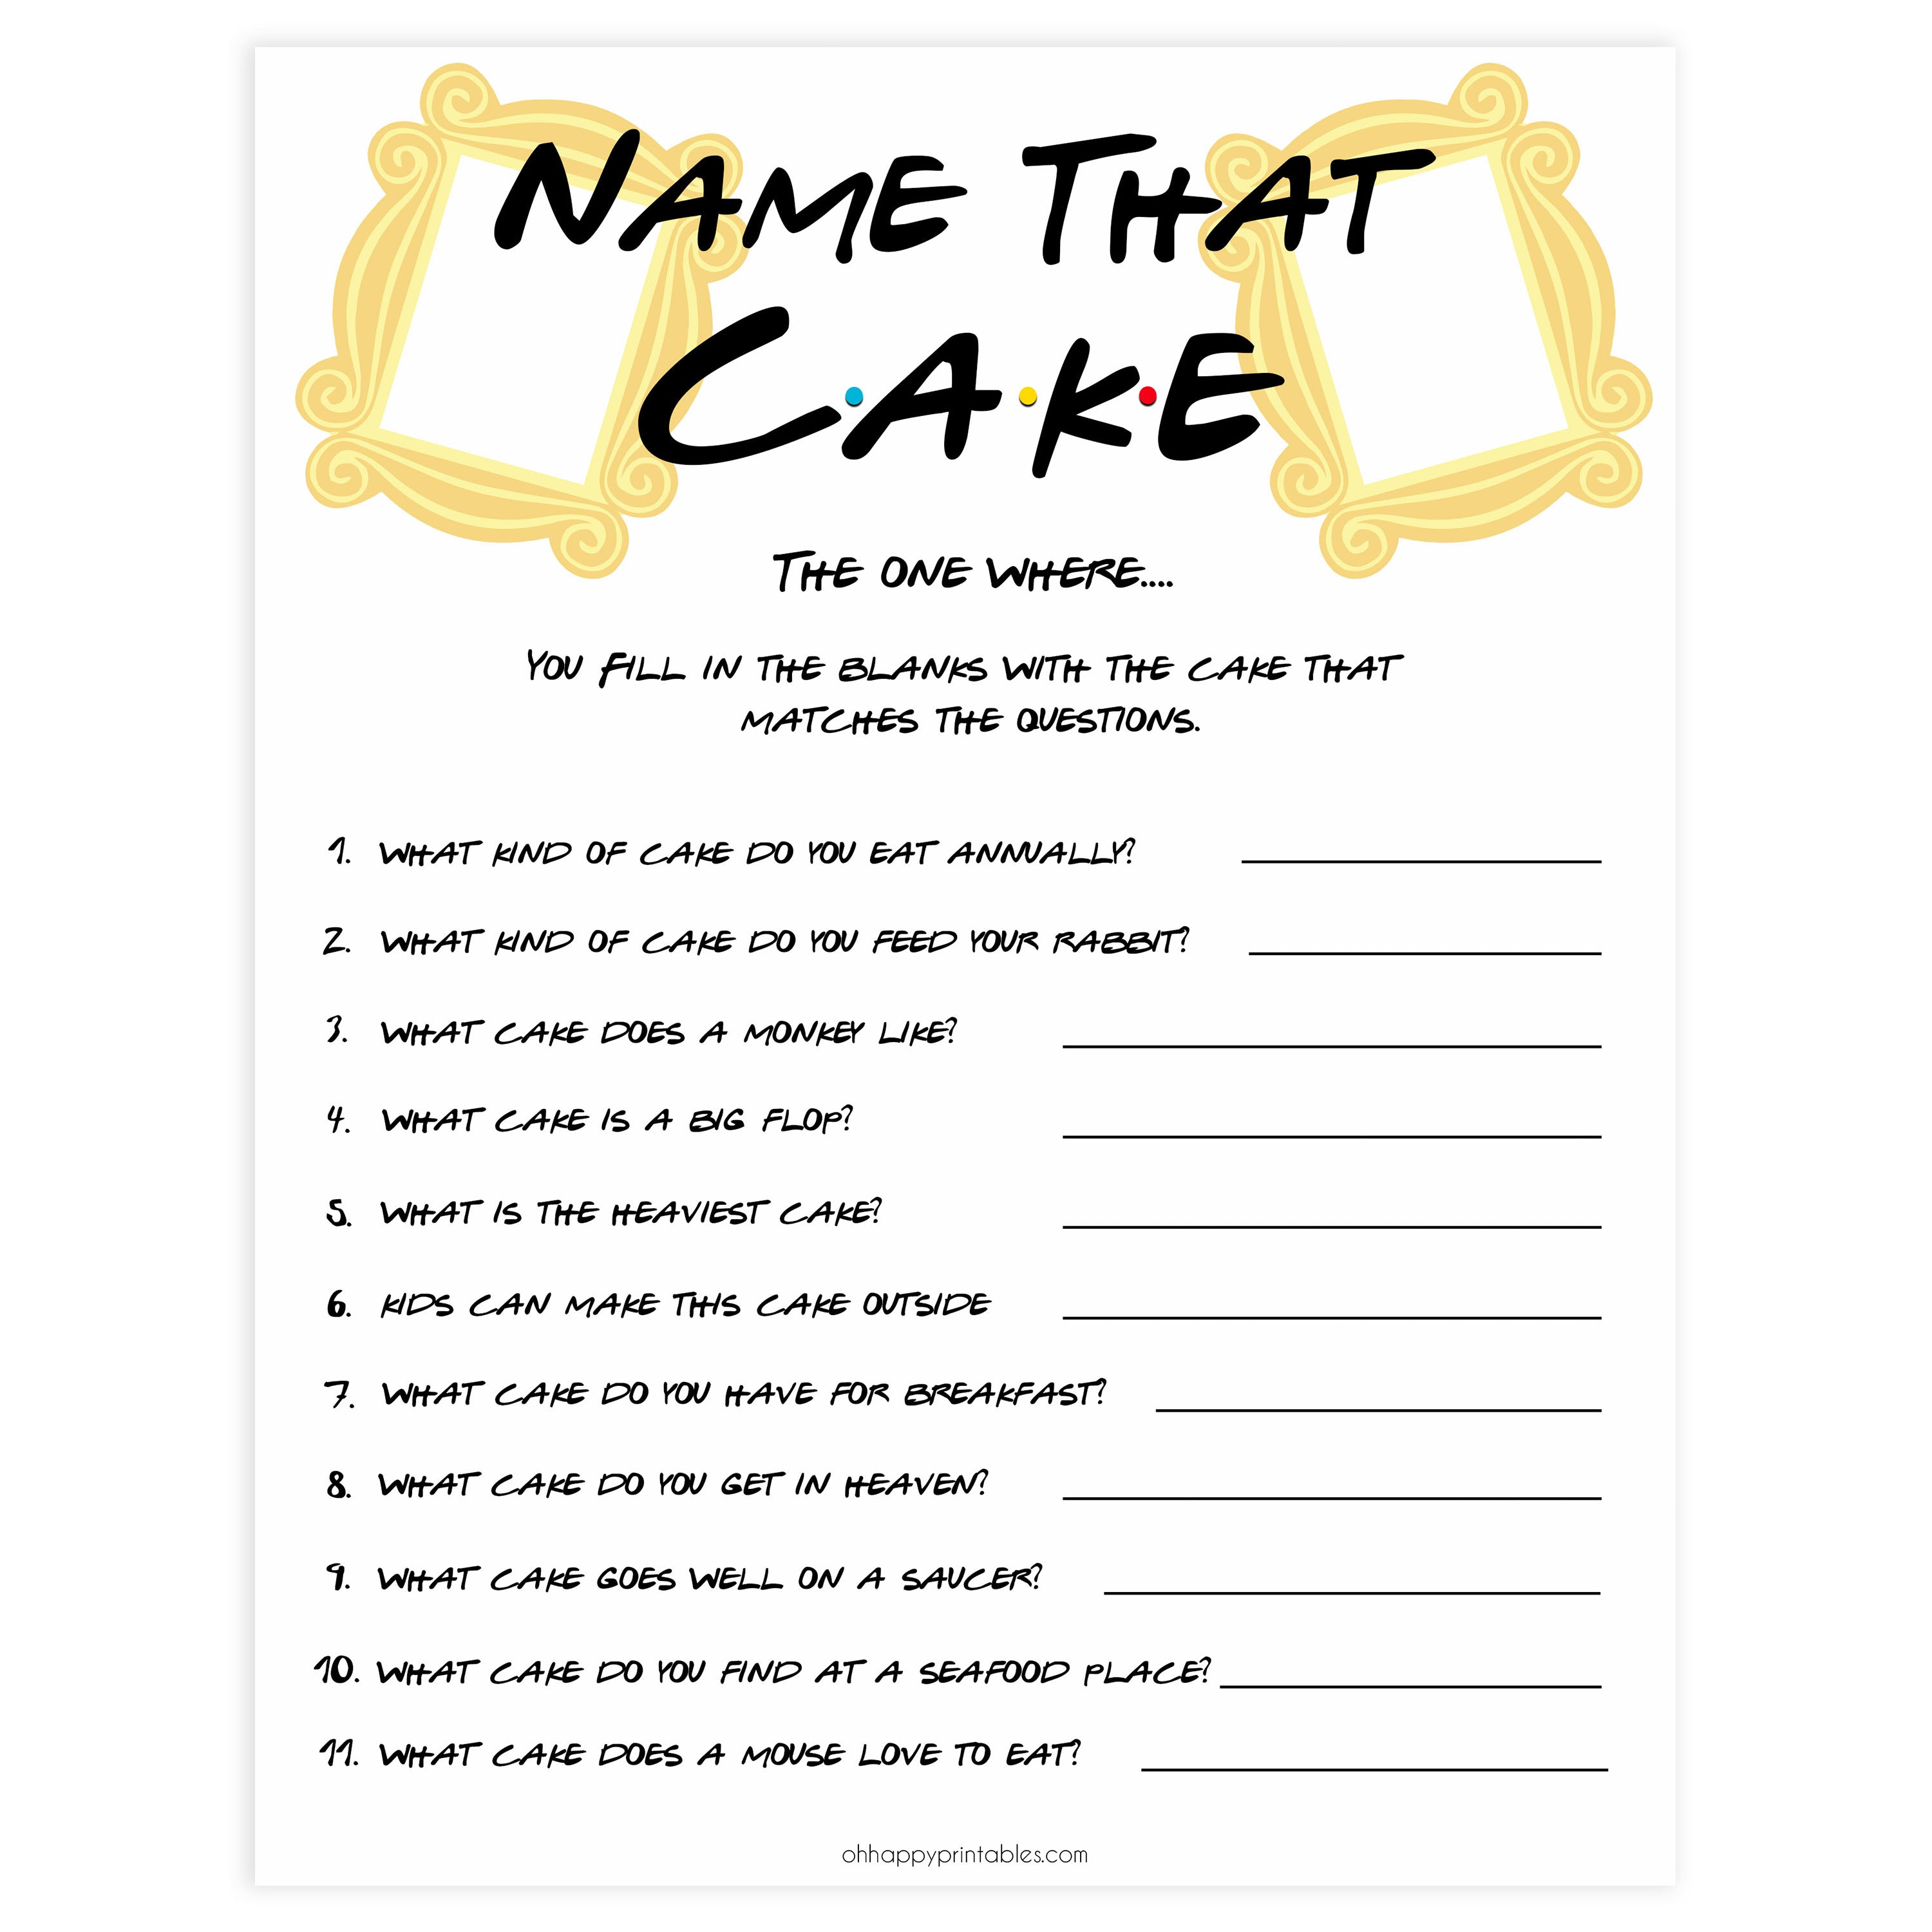 name-that-cake-game-printable-friends-bridal-shower-games-ohhappyprintables